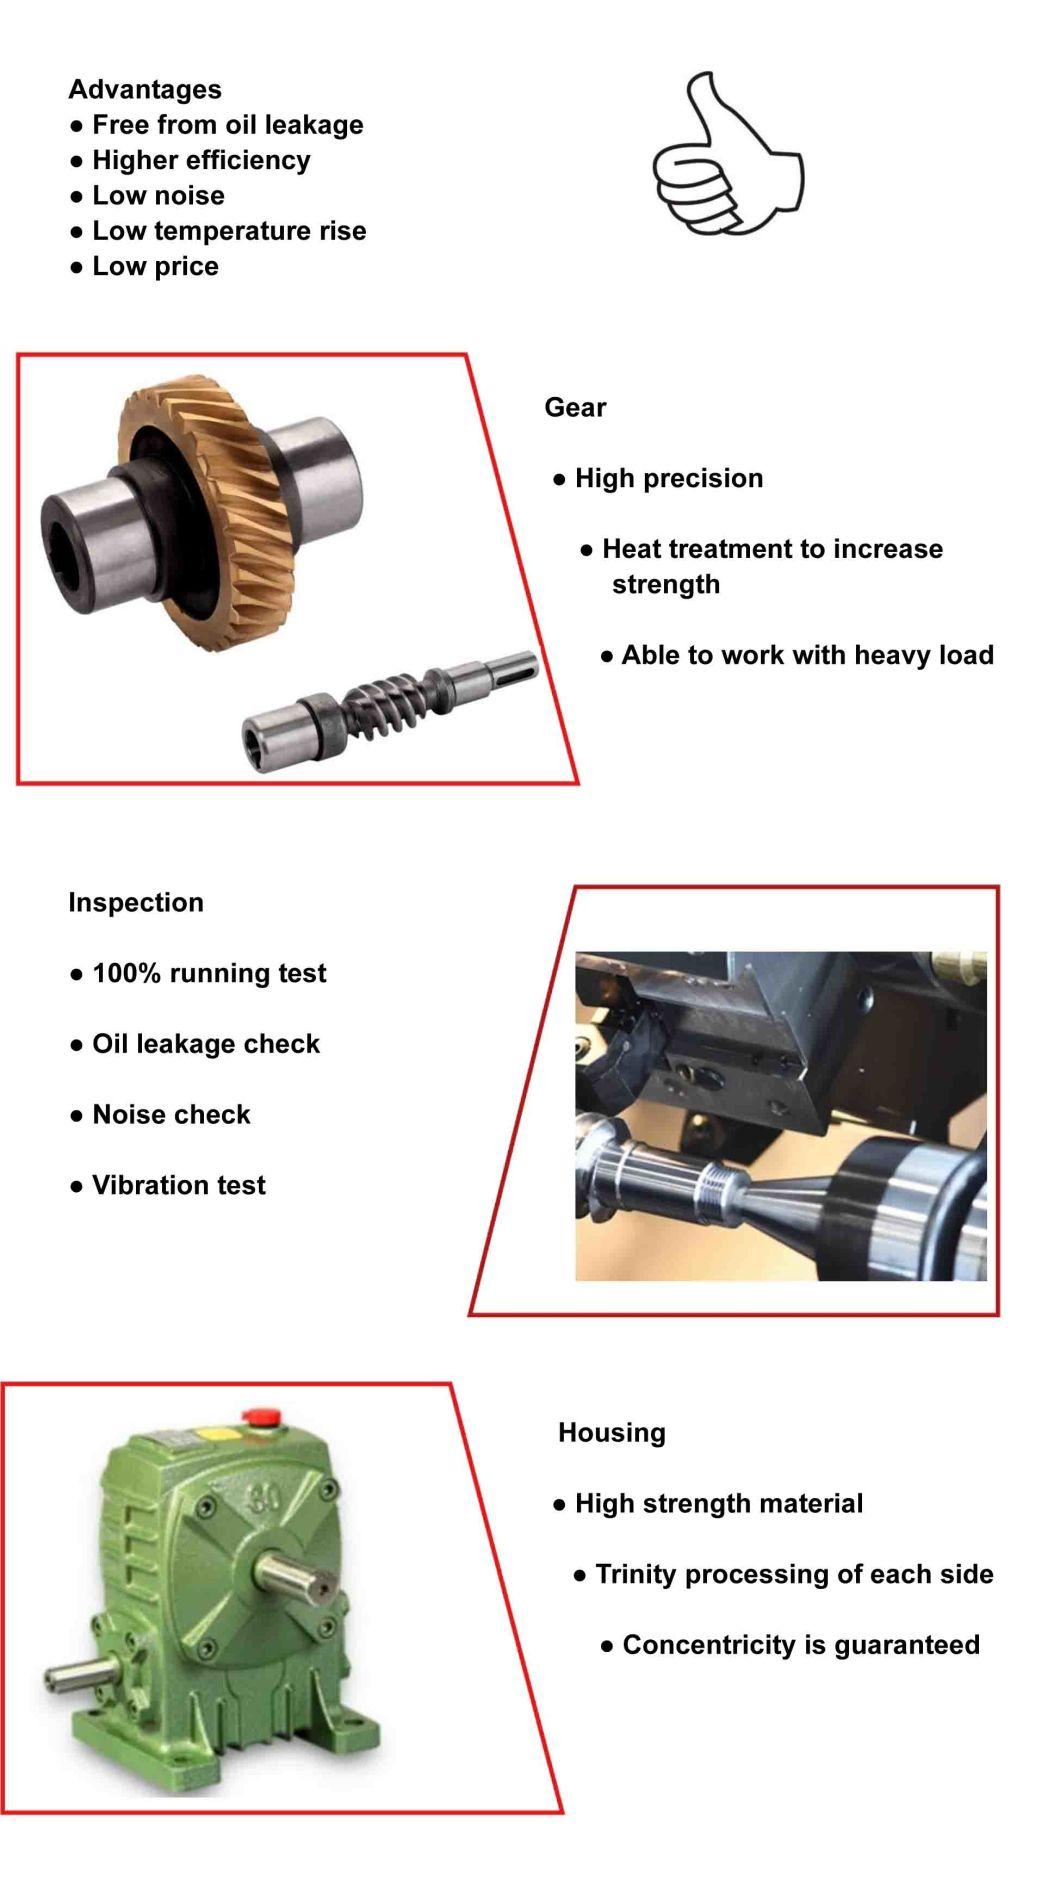 Wp Right Angle 90 Degree Cast Iron Reduction Speed Gearbox Worm Reducer Wpa Wpo Wps Wpx Worm Motor Unit Gear Box